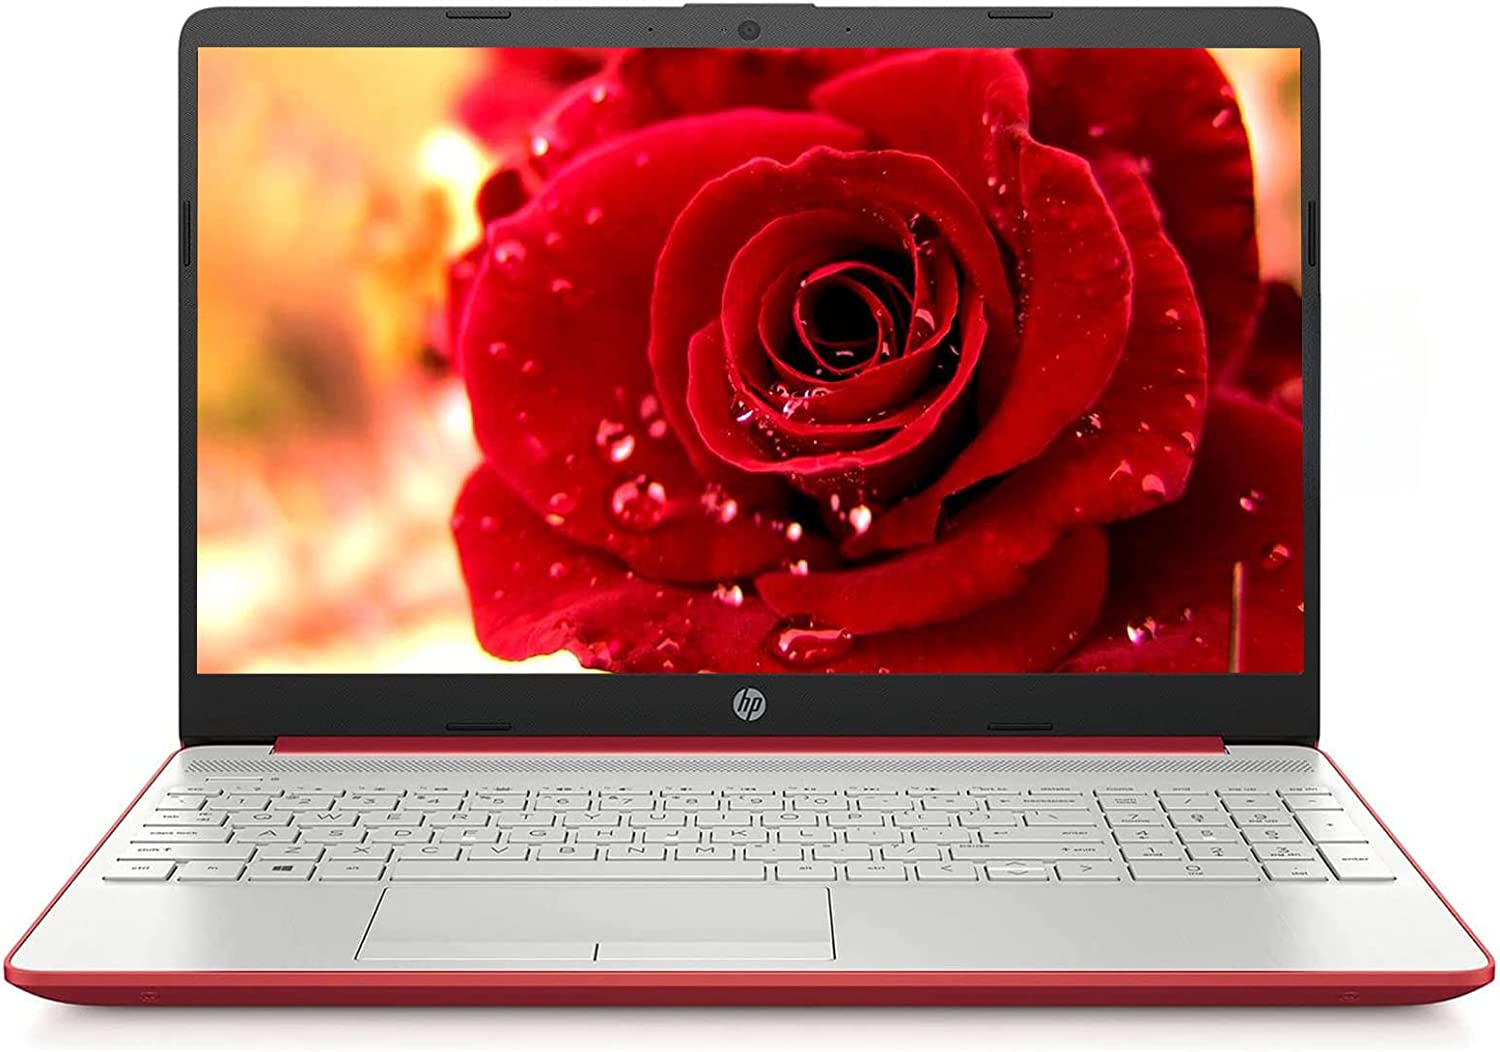 HP Newest Flagship 15.6 HD Pavilion Laptop for [...]